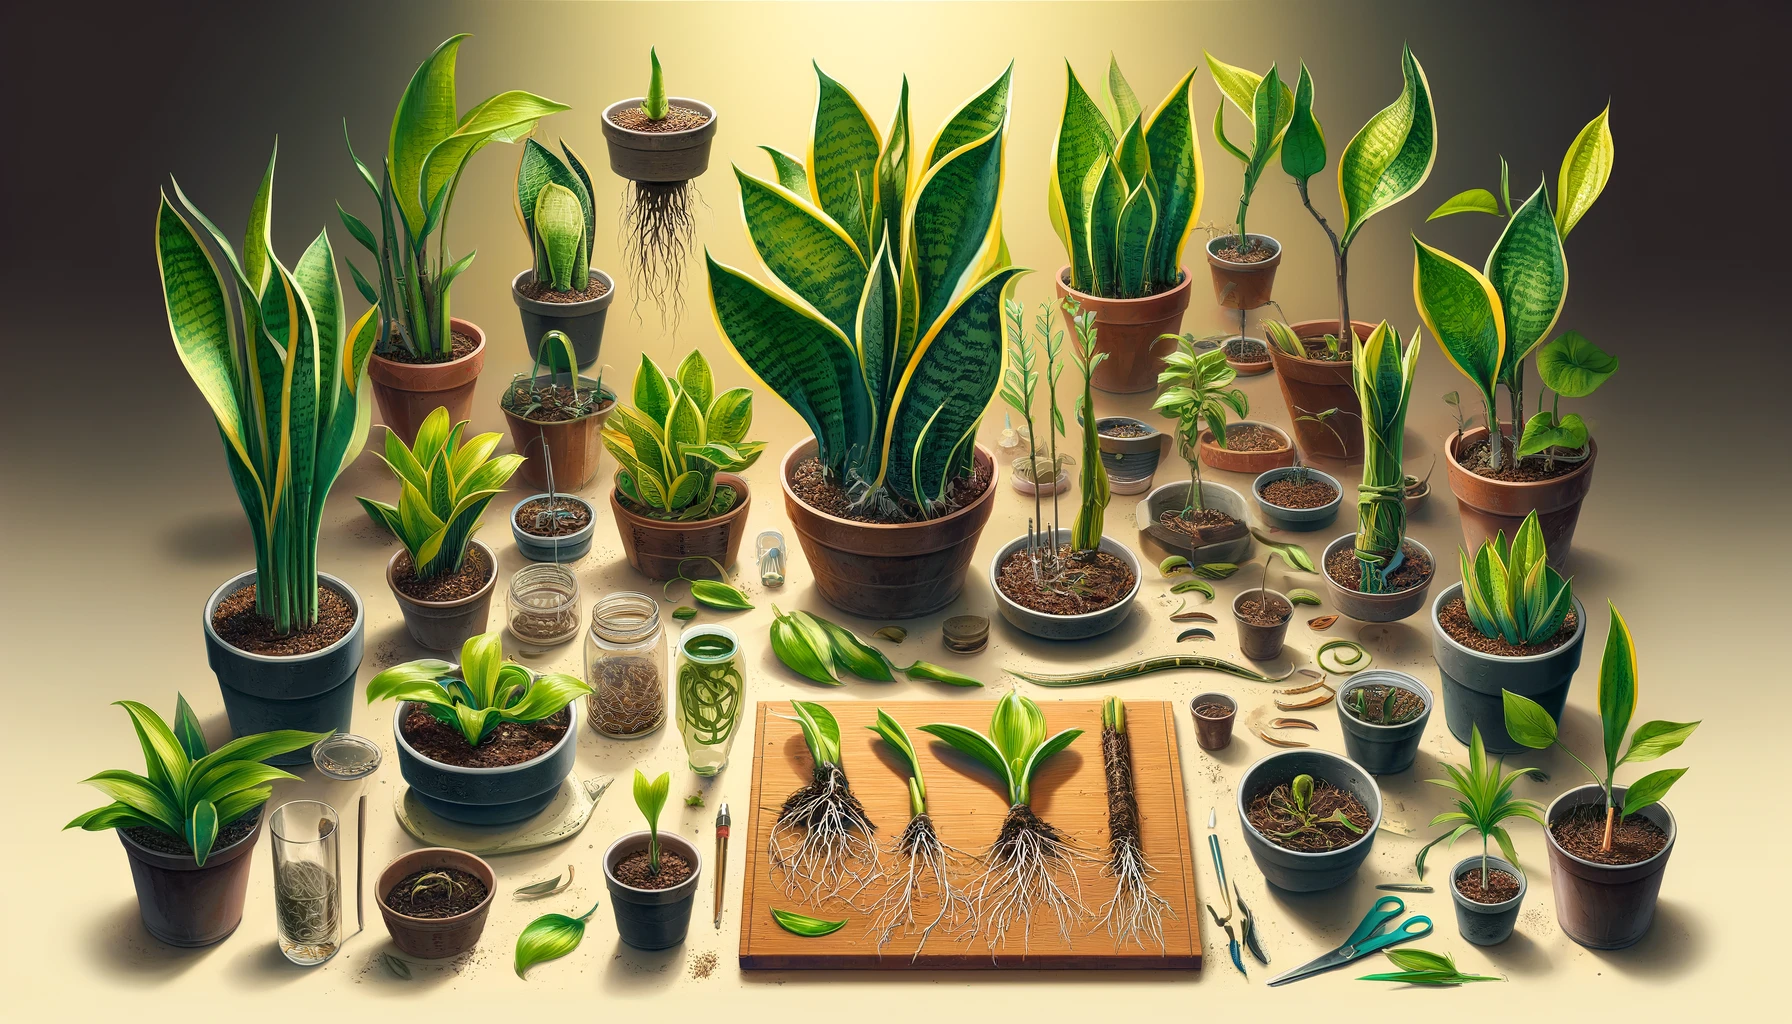 Vibrant display of snake plant propagation by division and leaf cuttings, with various pots showing stages from initial cuttings to young plants with emerging roots and mature propagated plants. The indoor gardening setup is well-organized and visually appealing, clearly showcasing the propagation process and emphasizing the healthy growth of the snake plants.